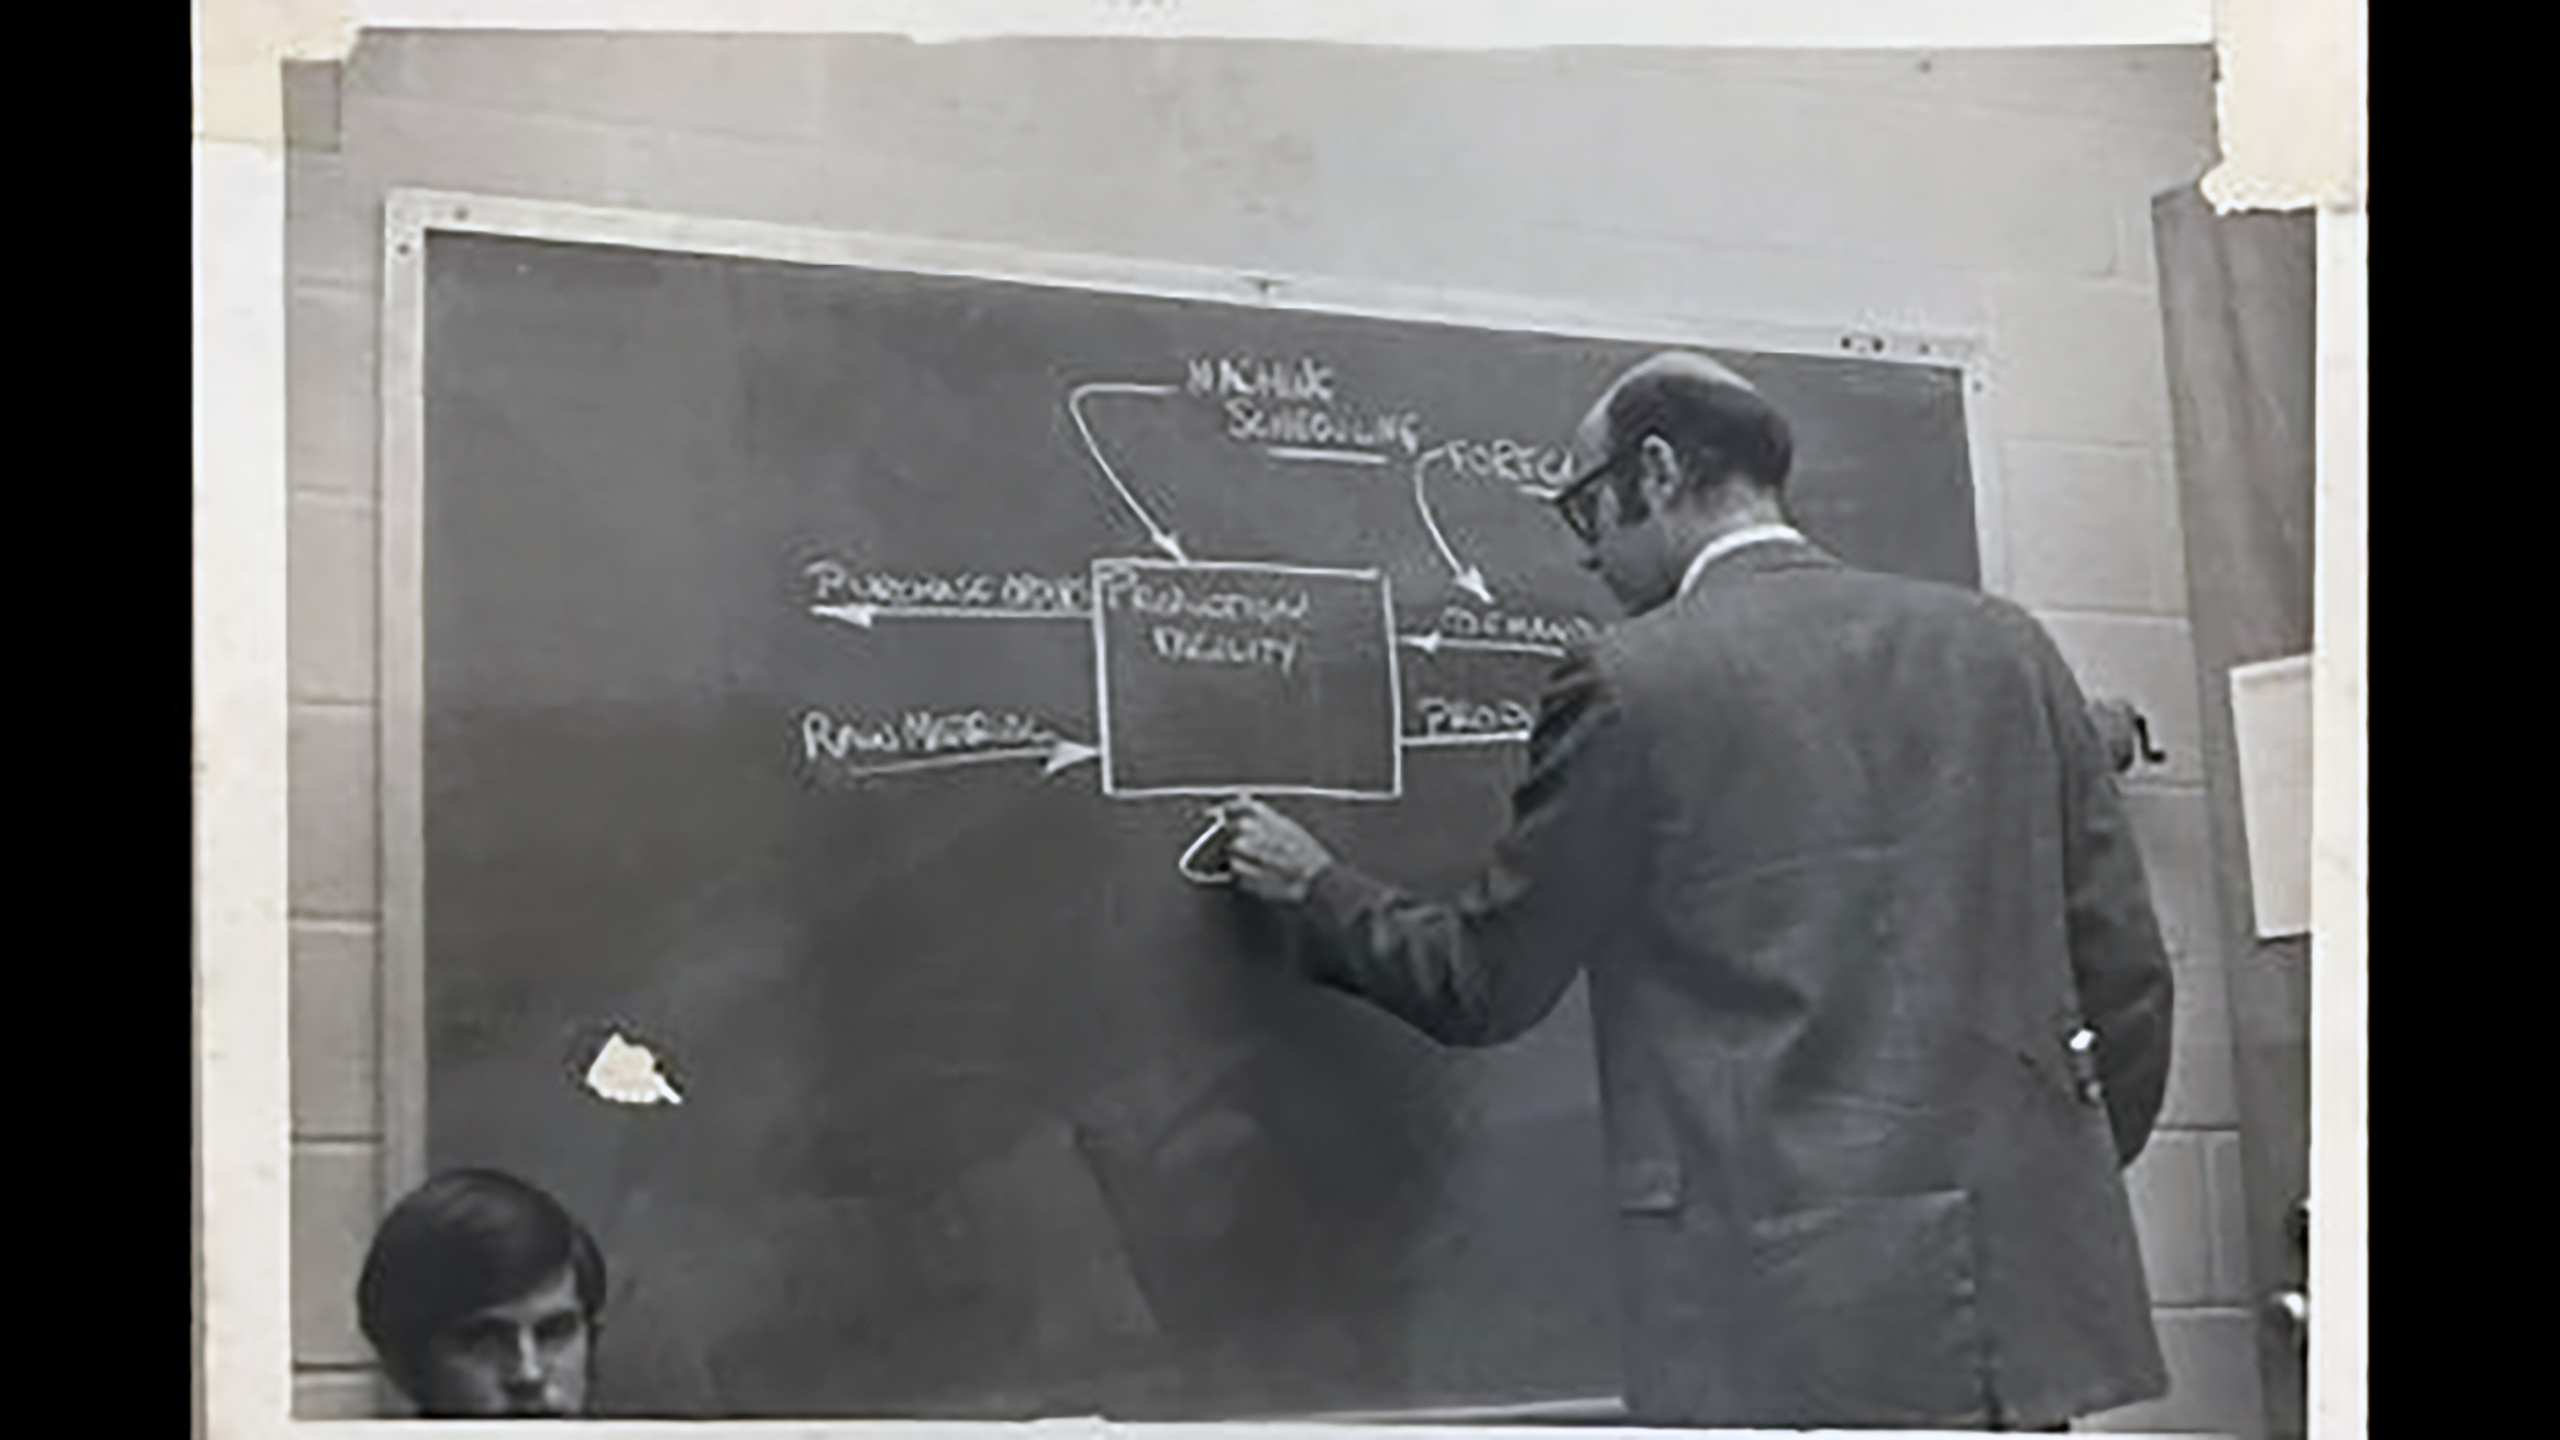 Blast from the Past: Thom Hodgson Teaching at UF in 1971